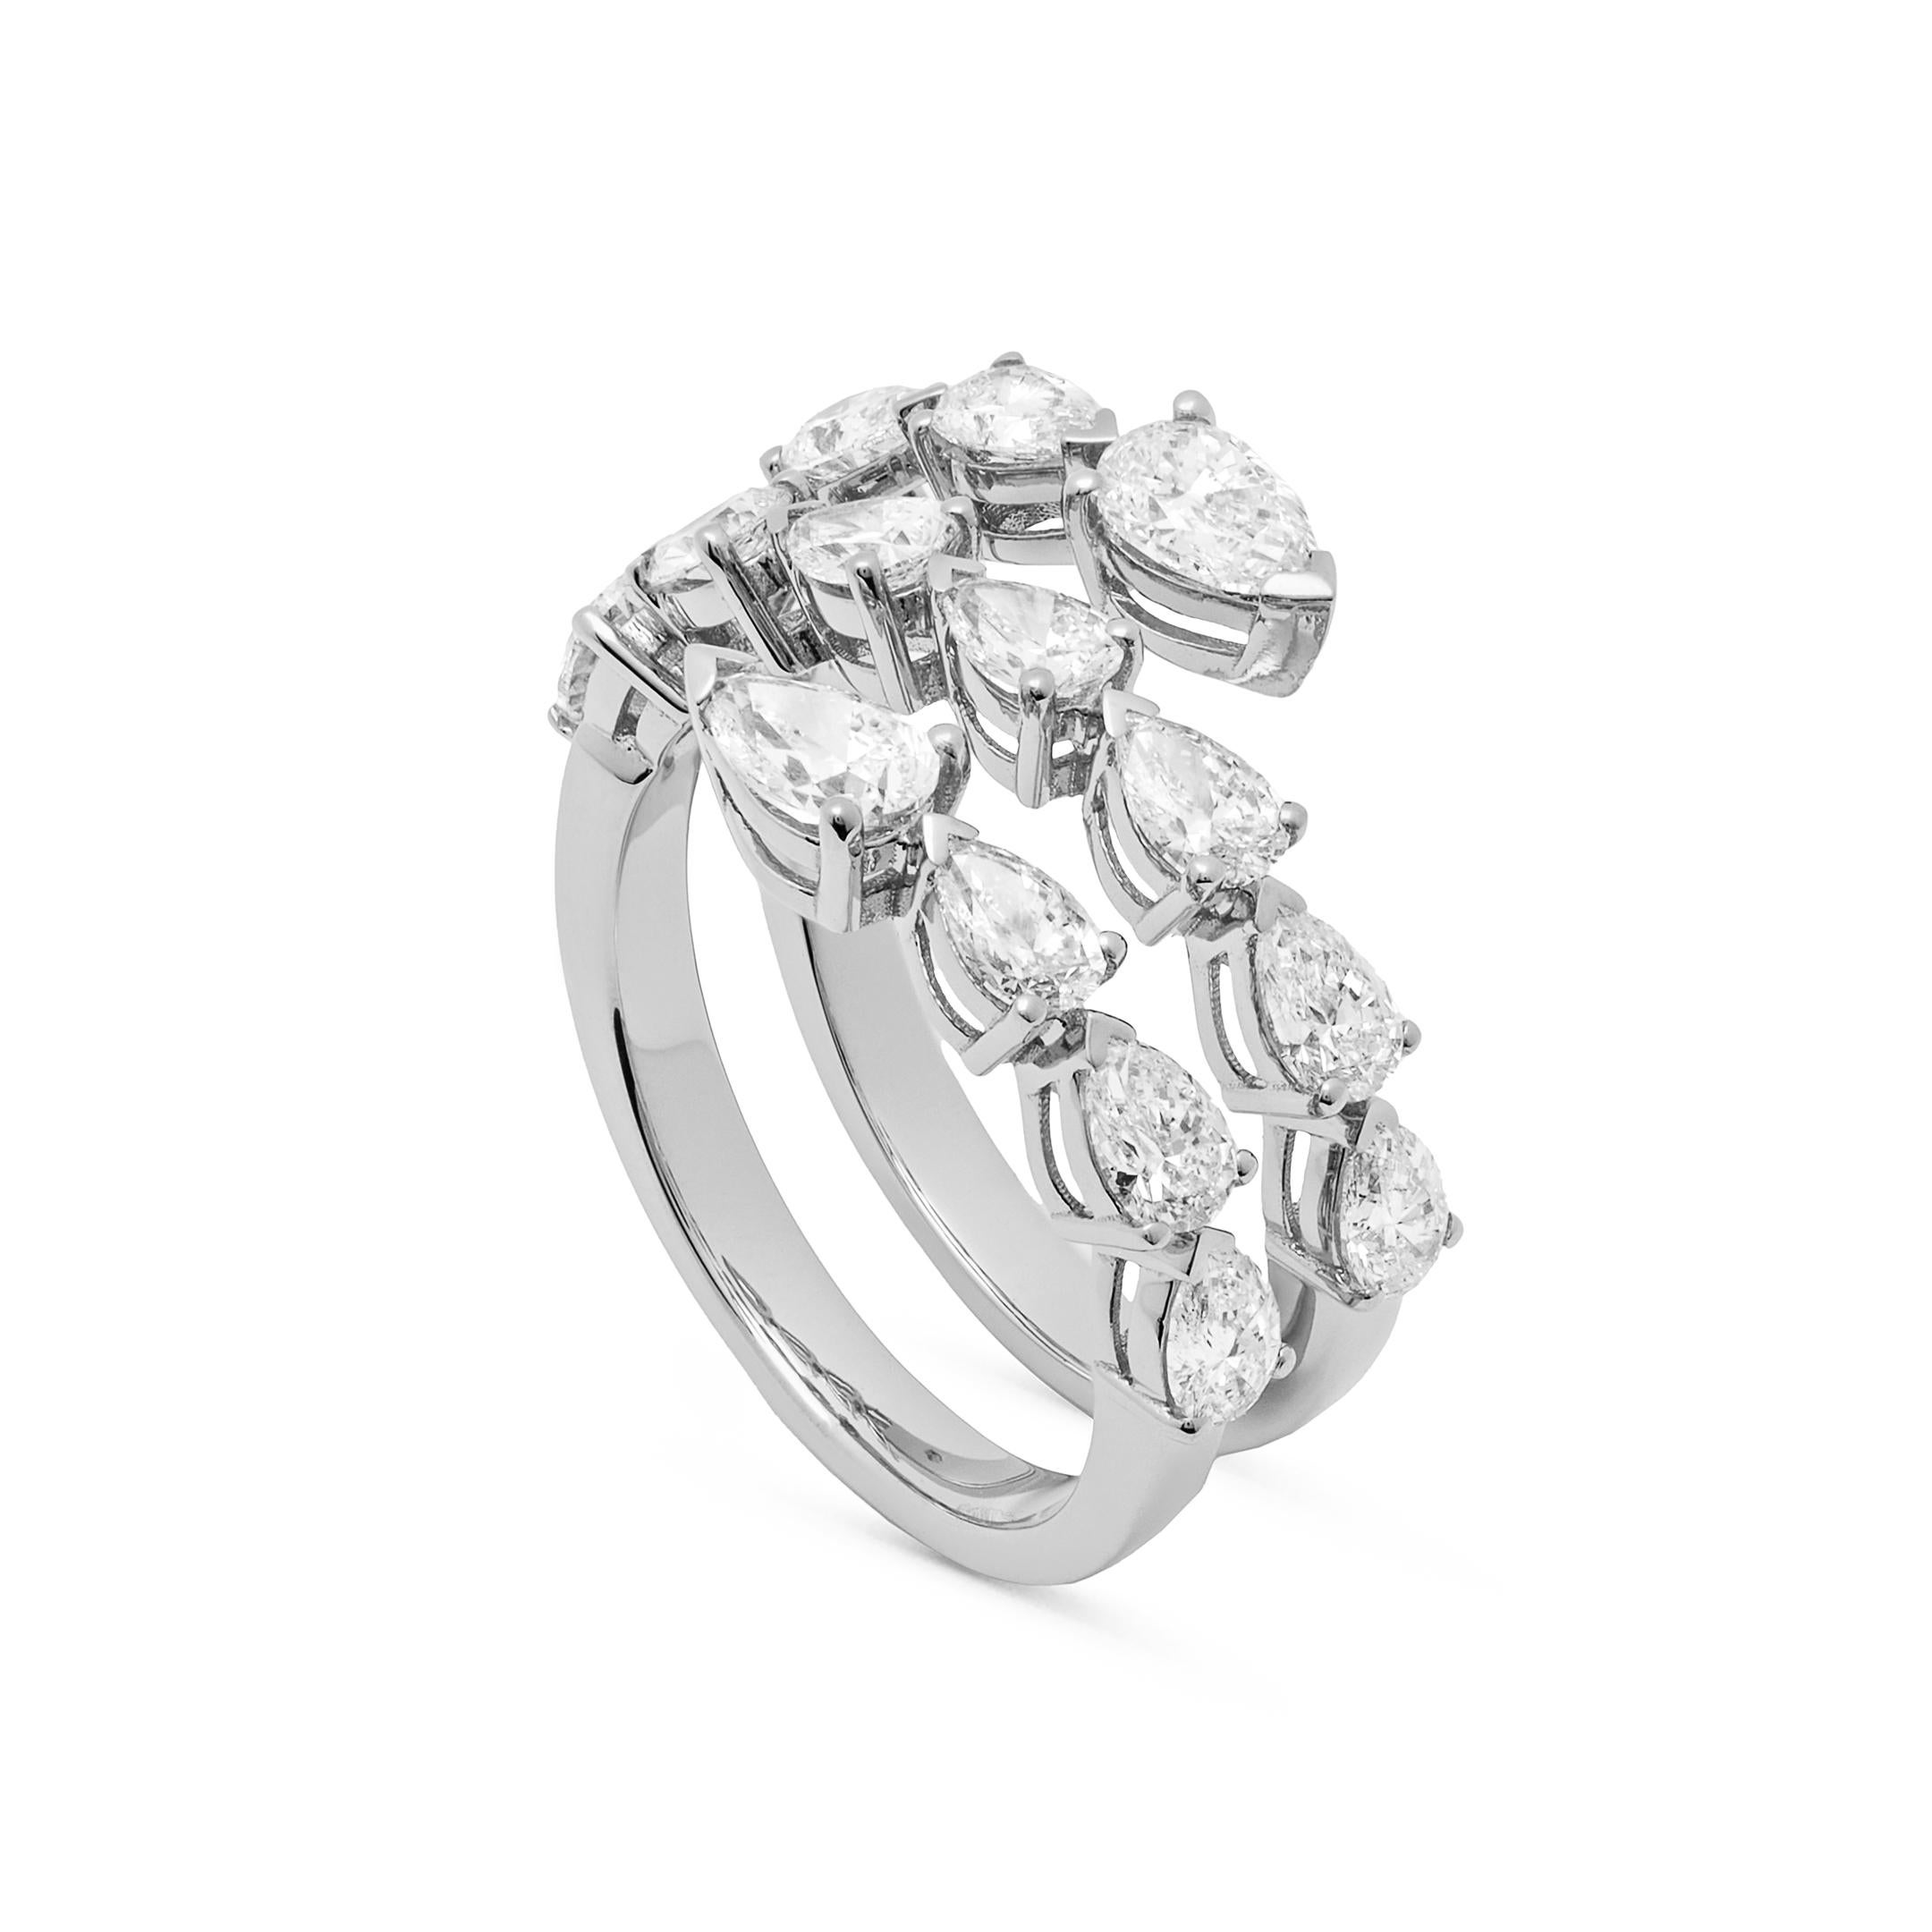 Three rows of sparkling diamonds comprise the Diamond Twist White Gold Ring. Stunning pear-shaped stones set in 18-karat white gold wrap elegantly around the finger. Wear your ring with denim, heels and your favorite Hermés bag for the perfect,